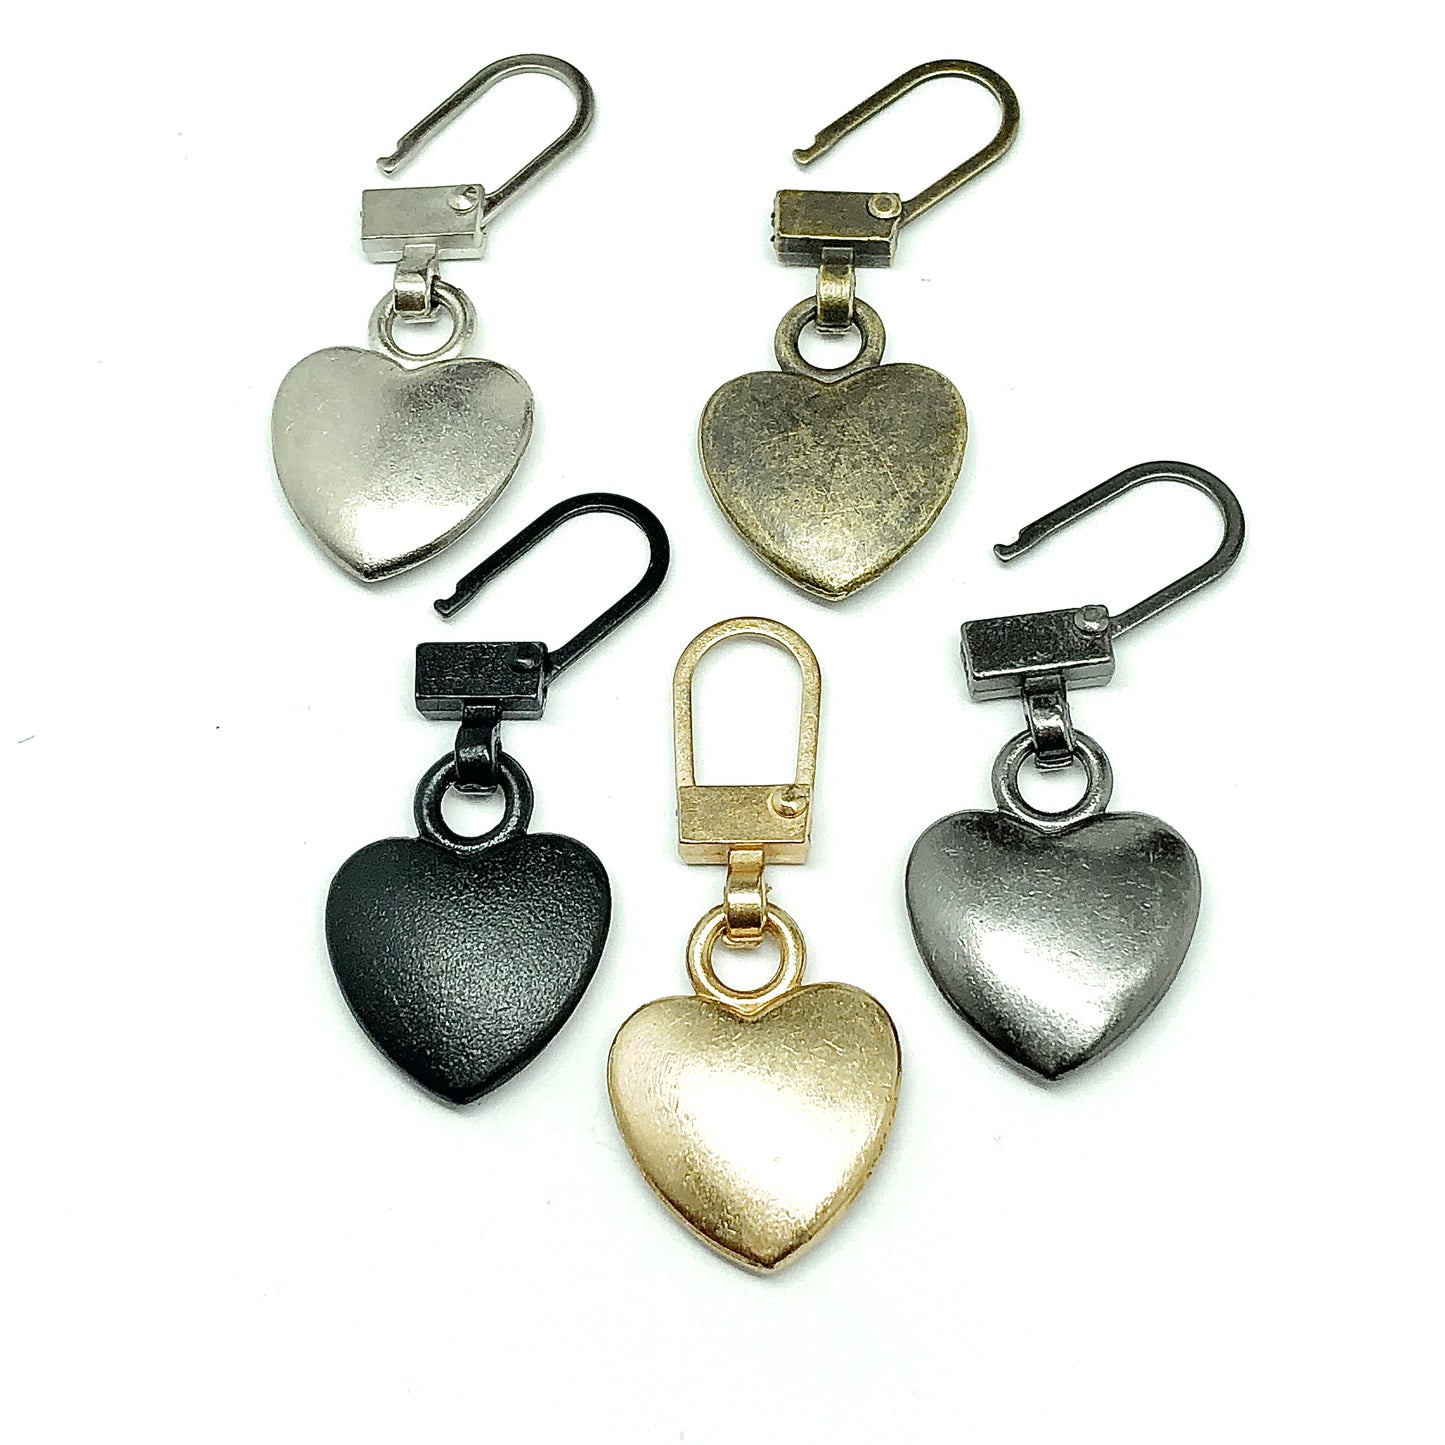 Zipper Repair Charm Heart Rustic Rose Gold - for Repair or Decorate Shoes,  Purses, Keychains + More